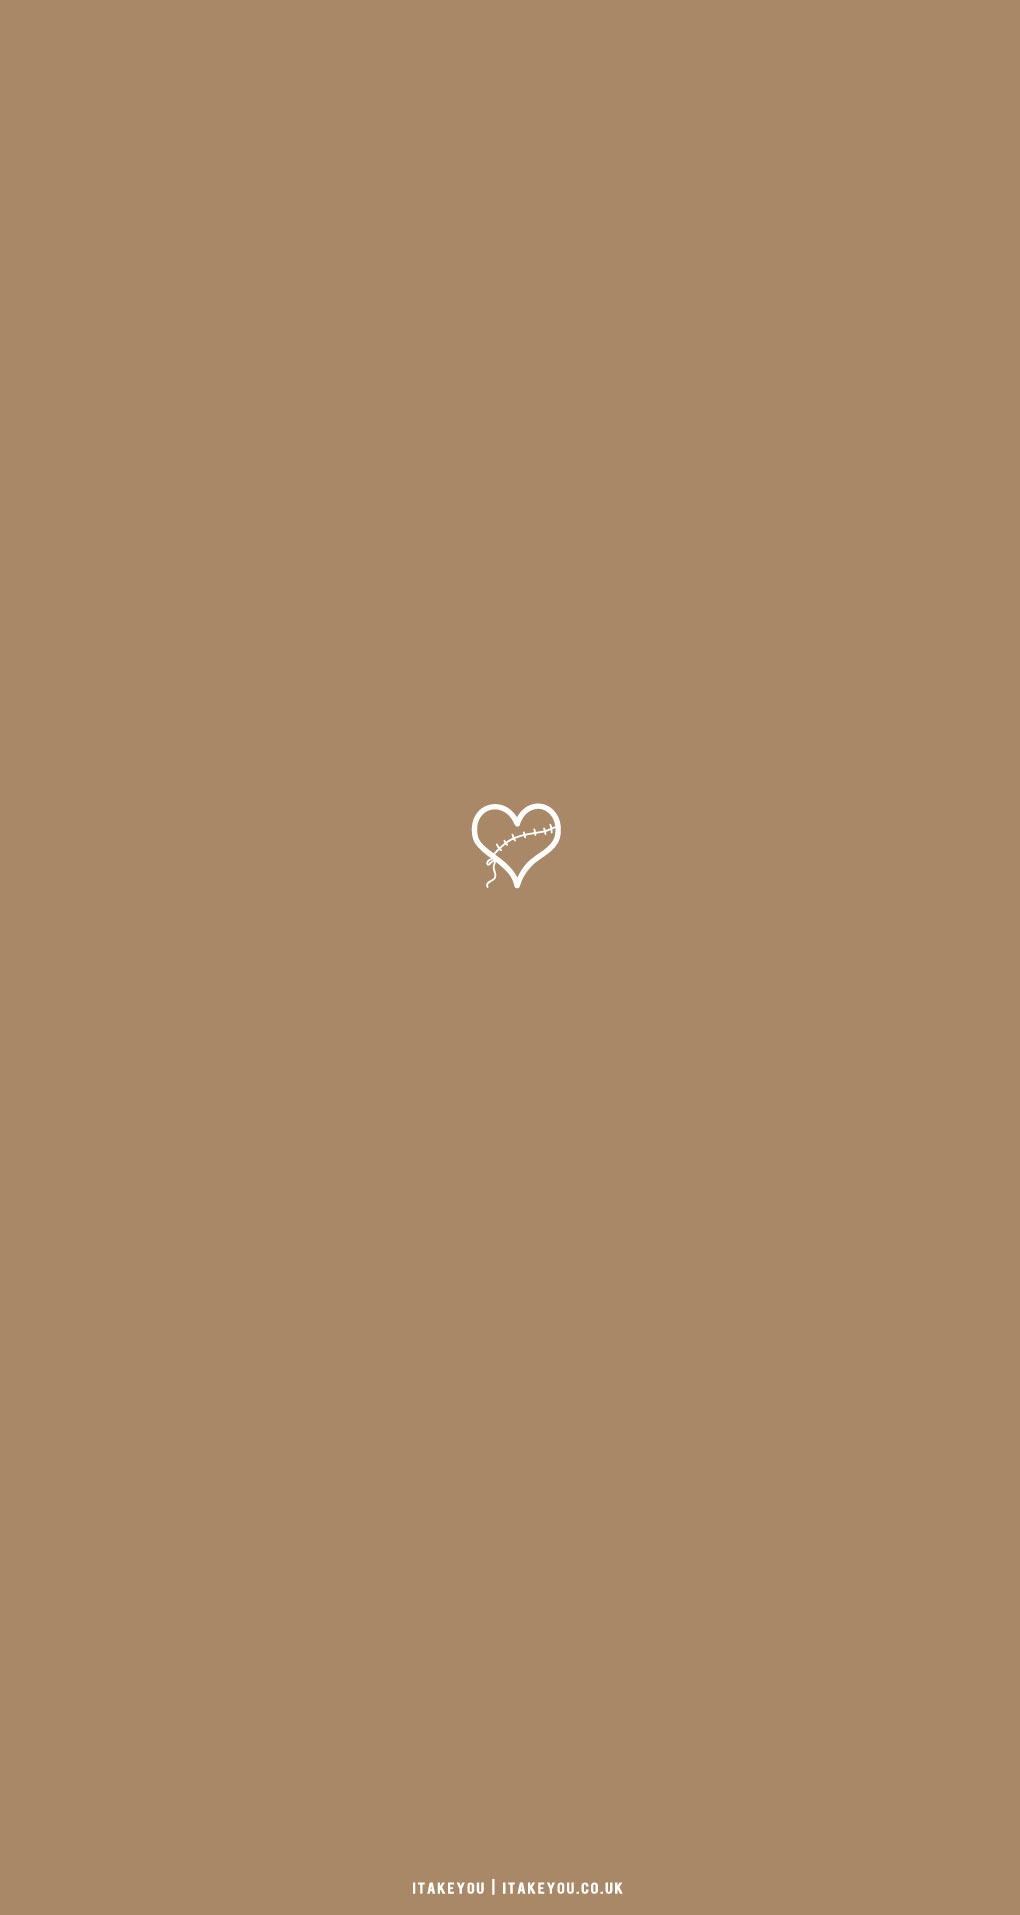 Cute Brown Aesthetic Wallpaper for Phone, Stitched Heart Minimalist I Take You. Wedding Readings. Wedding Ideas